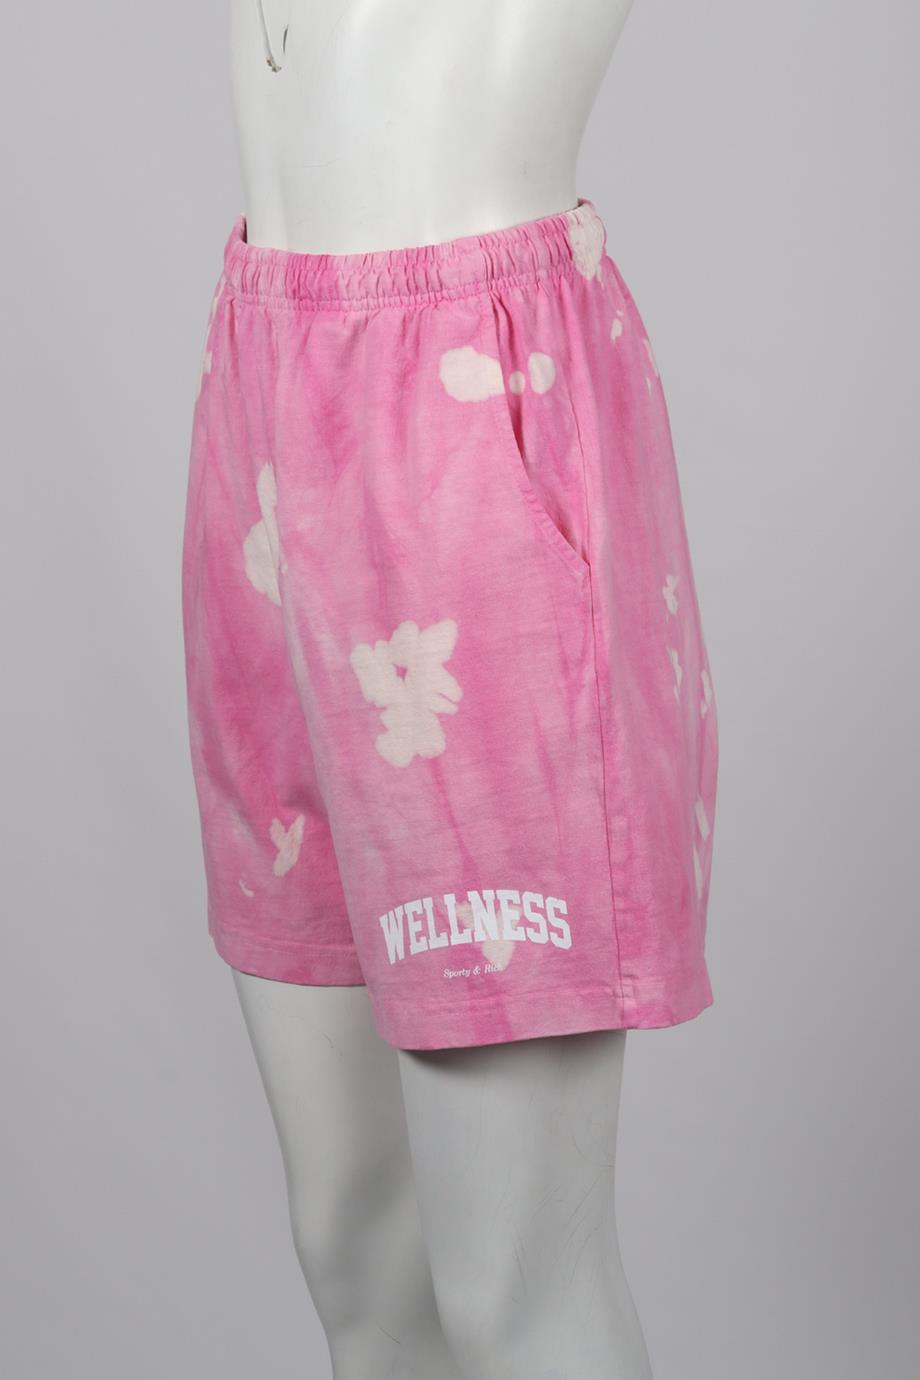 SPORTY AND RICH TIE DYED COTTON SHORTS MEDIUM